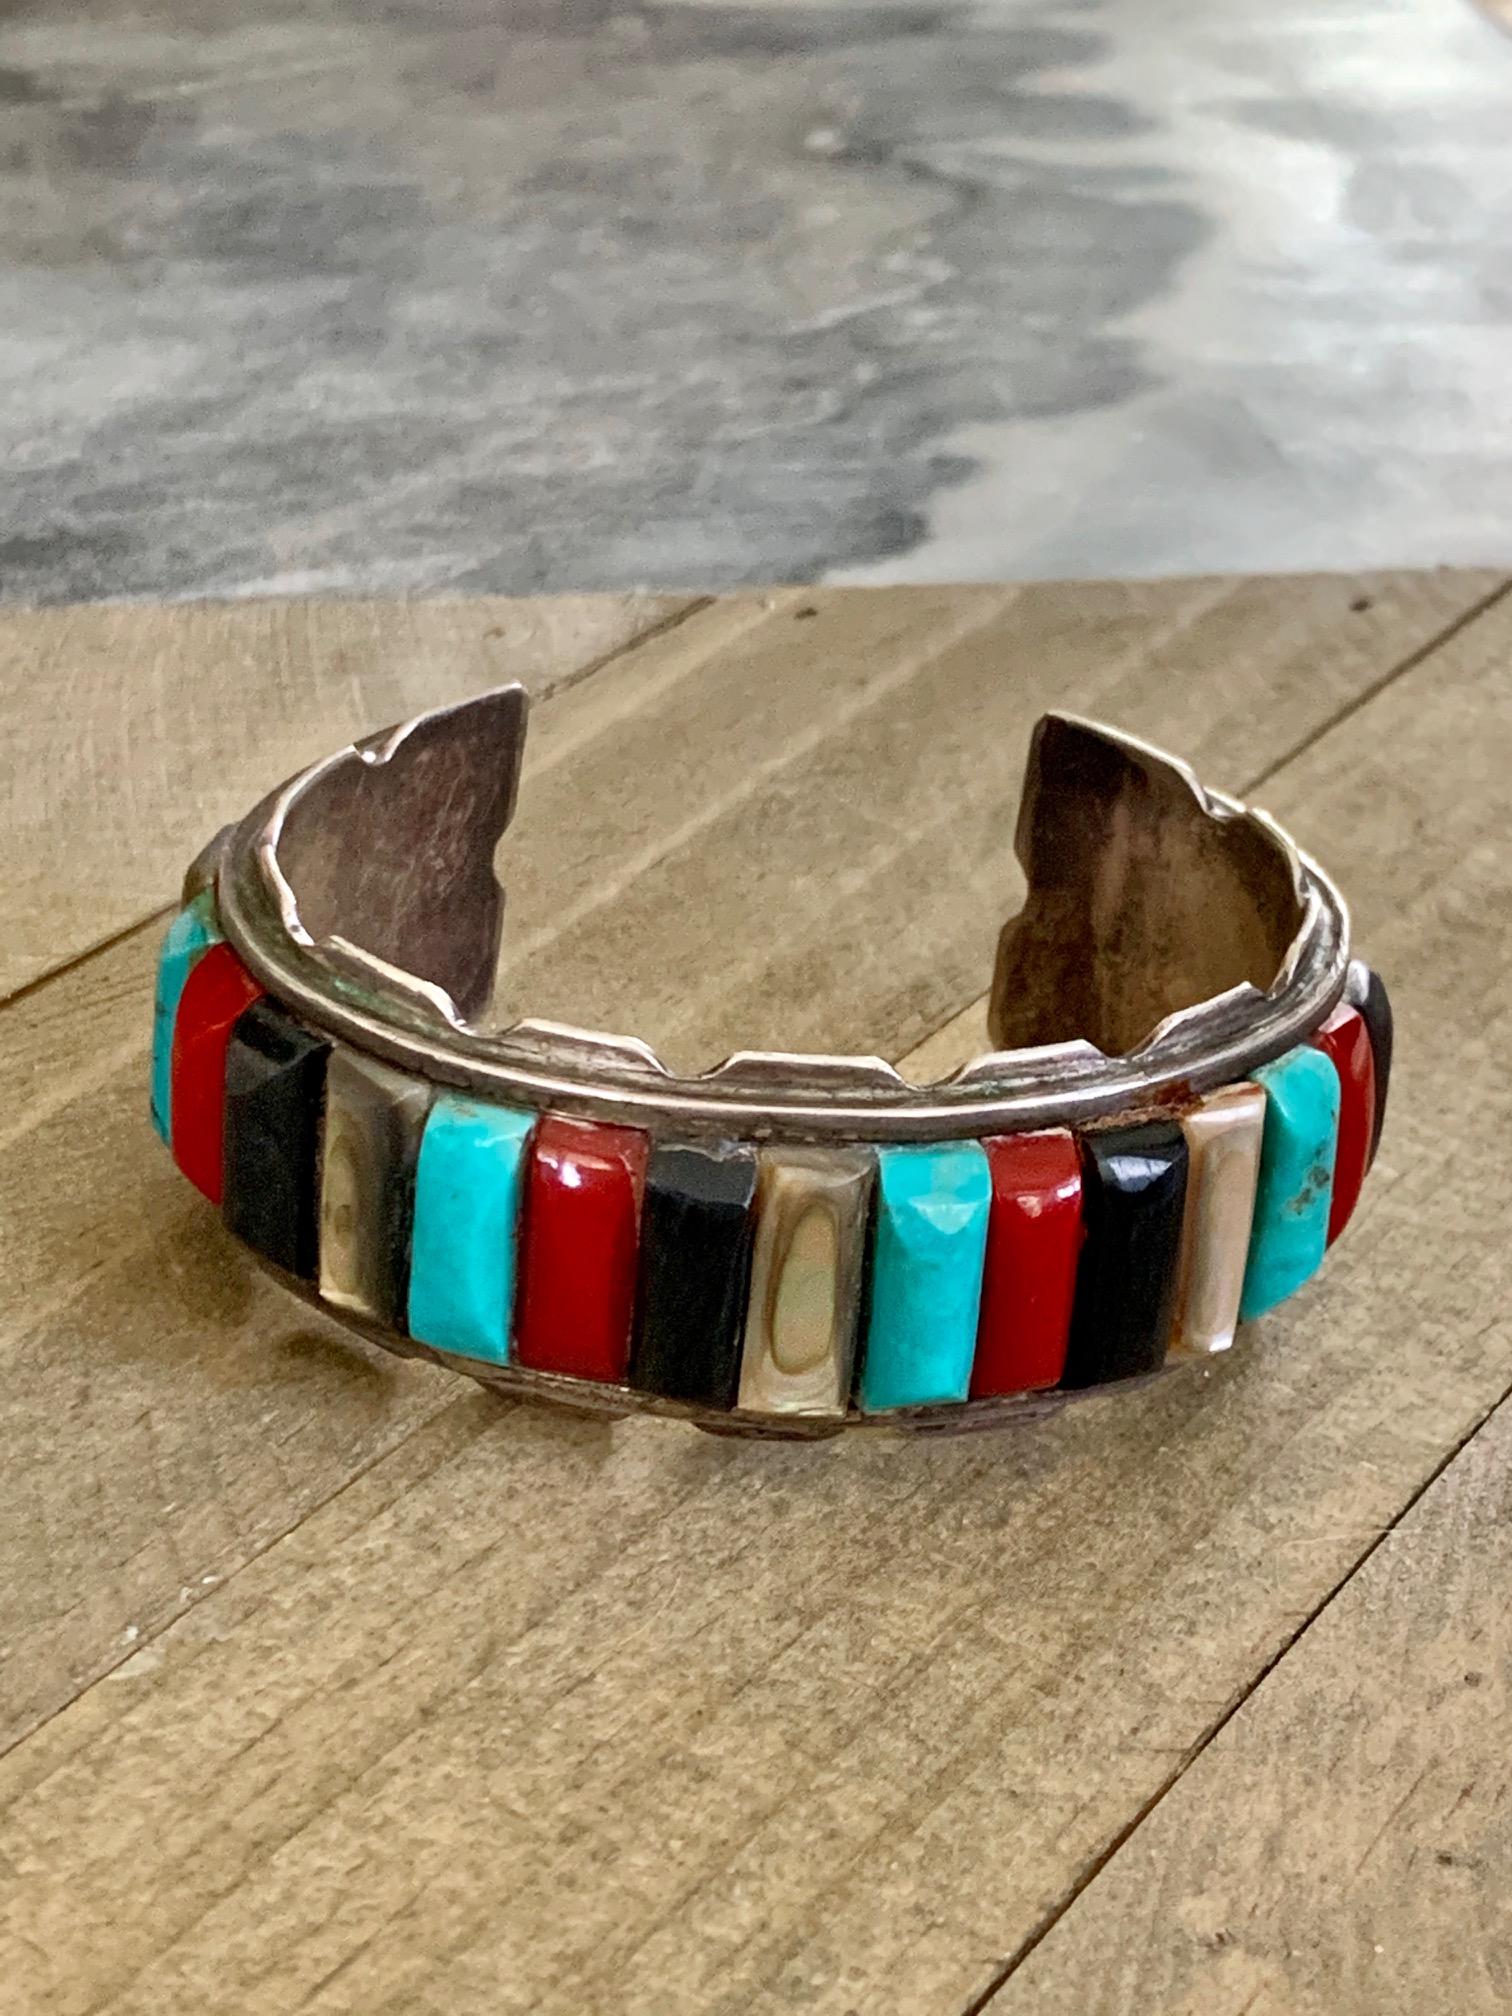 This beautiful Native American cuff bracelet features 23 multiple inlaid stones, including, Turquoise, Jet, Coral and Mother of Pearl.

The outside measures 8 1/4